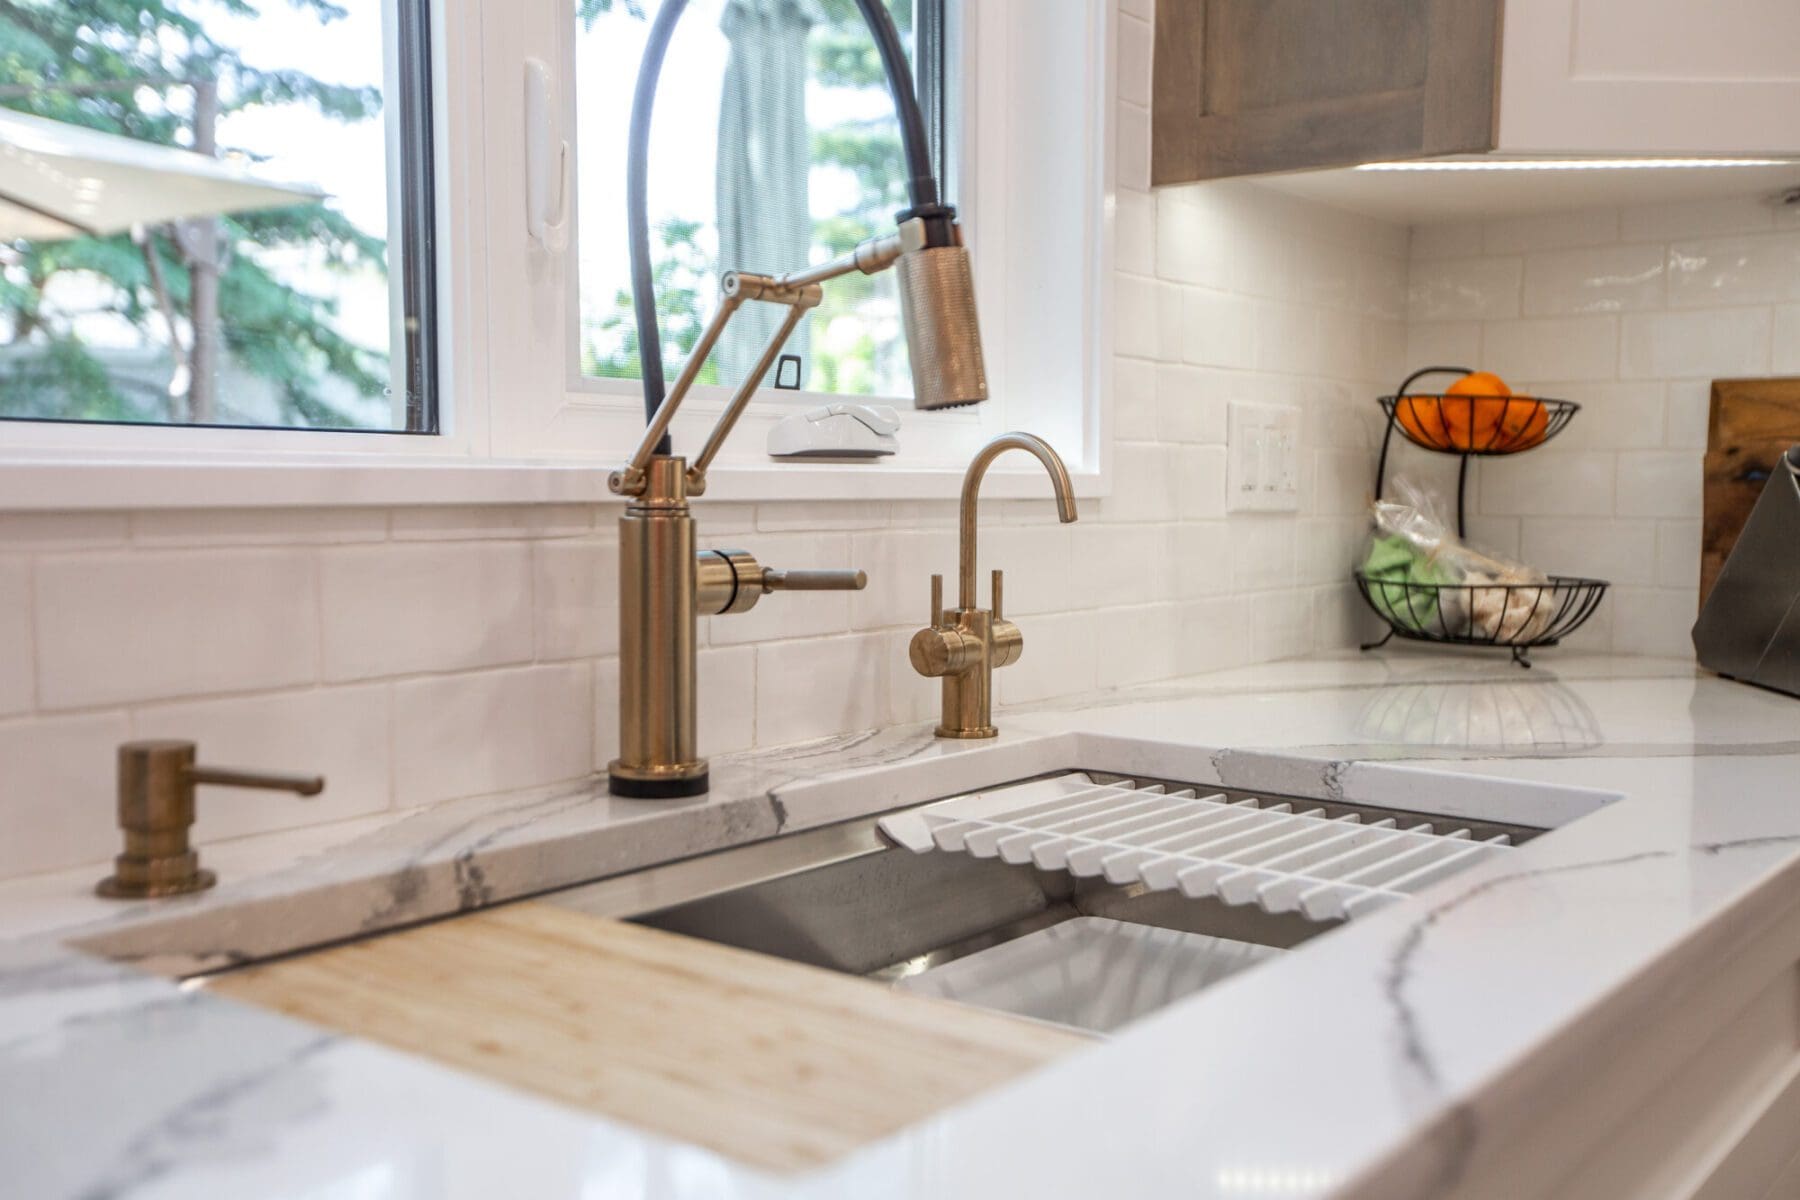 Kitchen Sink Solutions, Contact Renovations blog